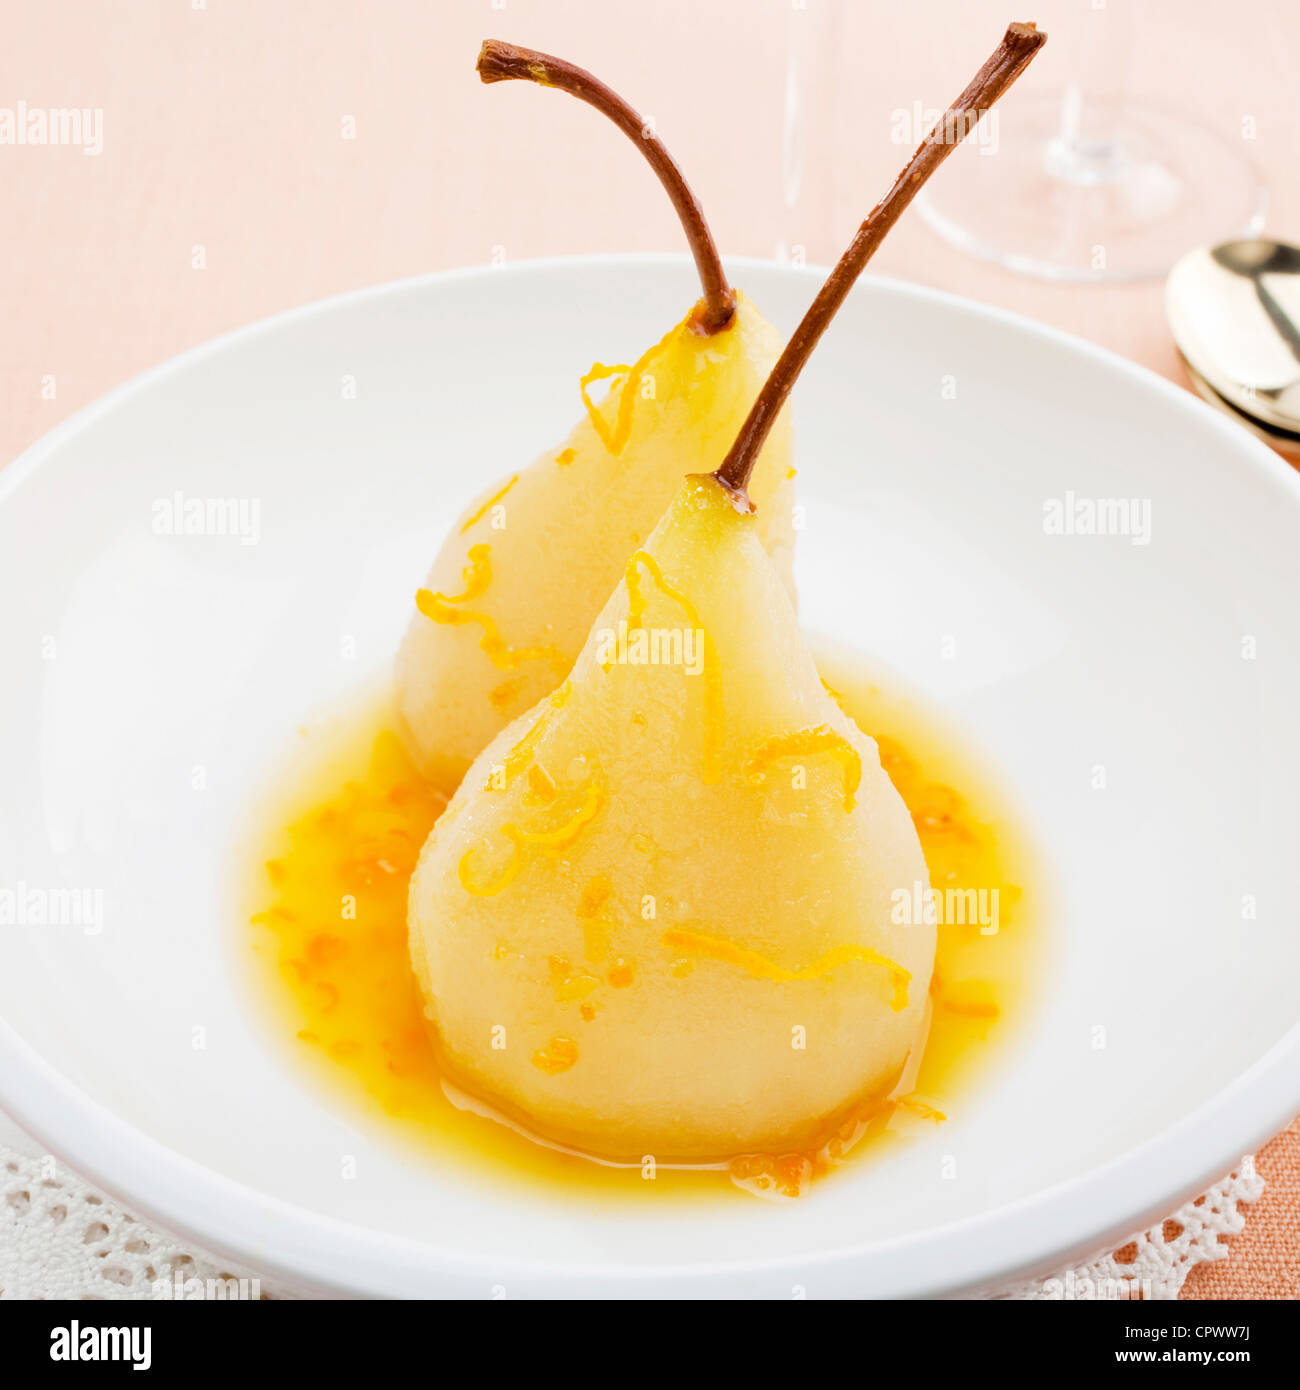 Two pears in a white bowl, poached in orange and lemon juice, garnished with slivers of zest. Stock Photo